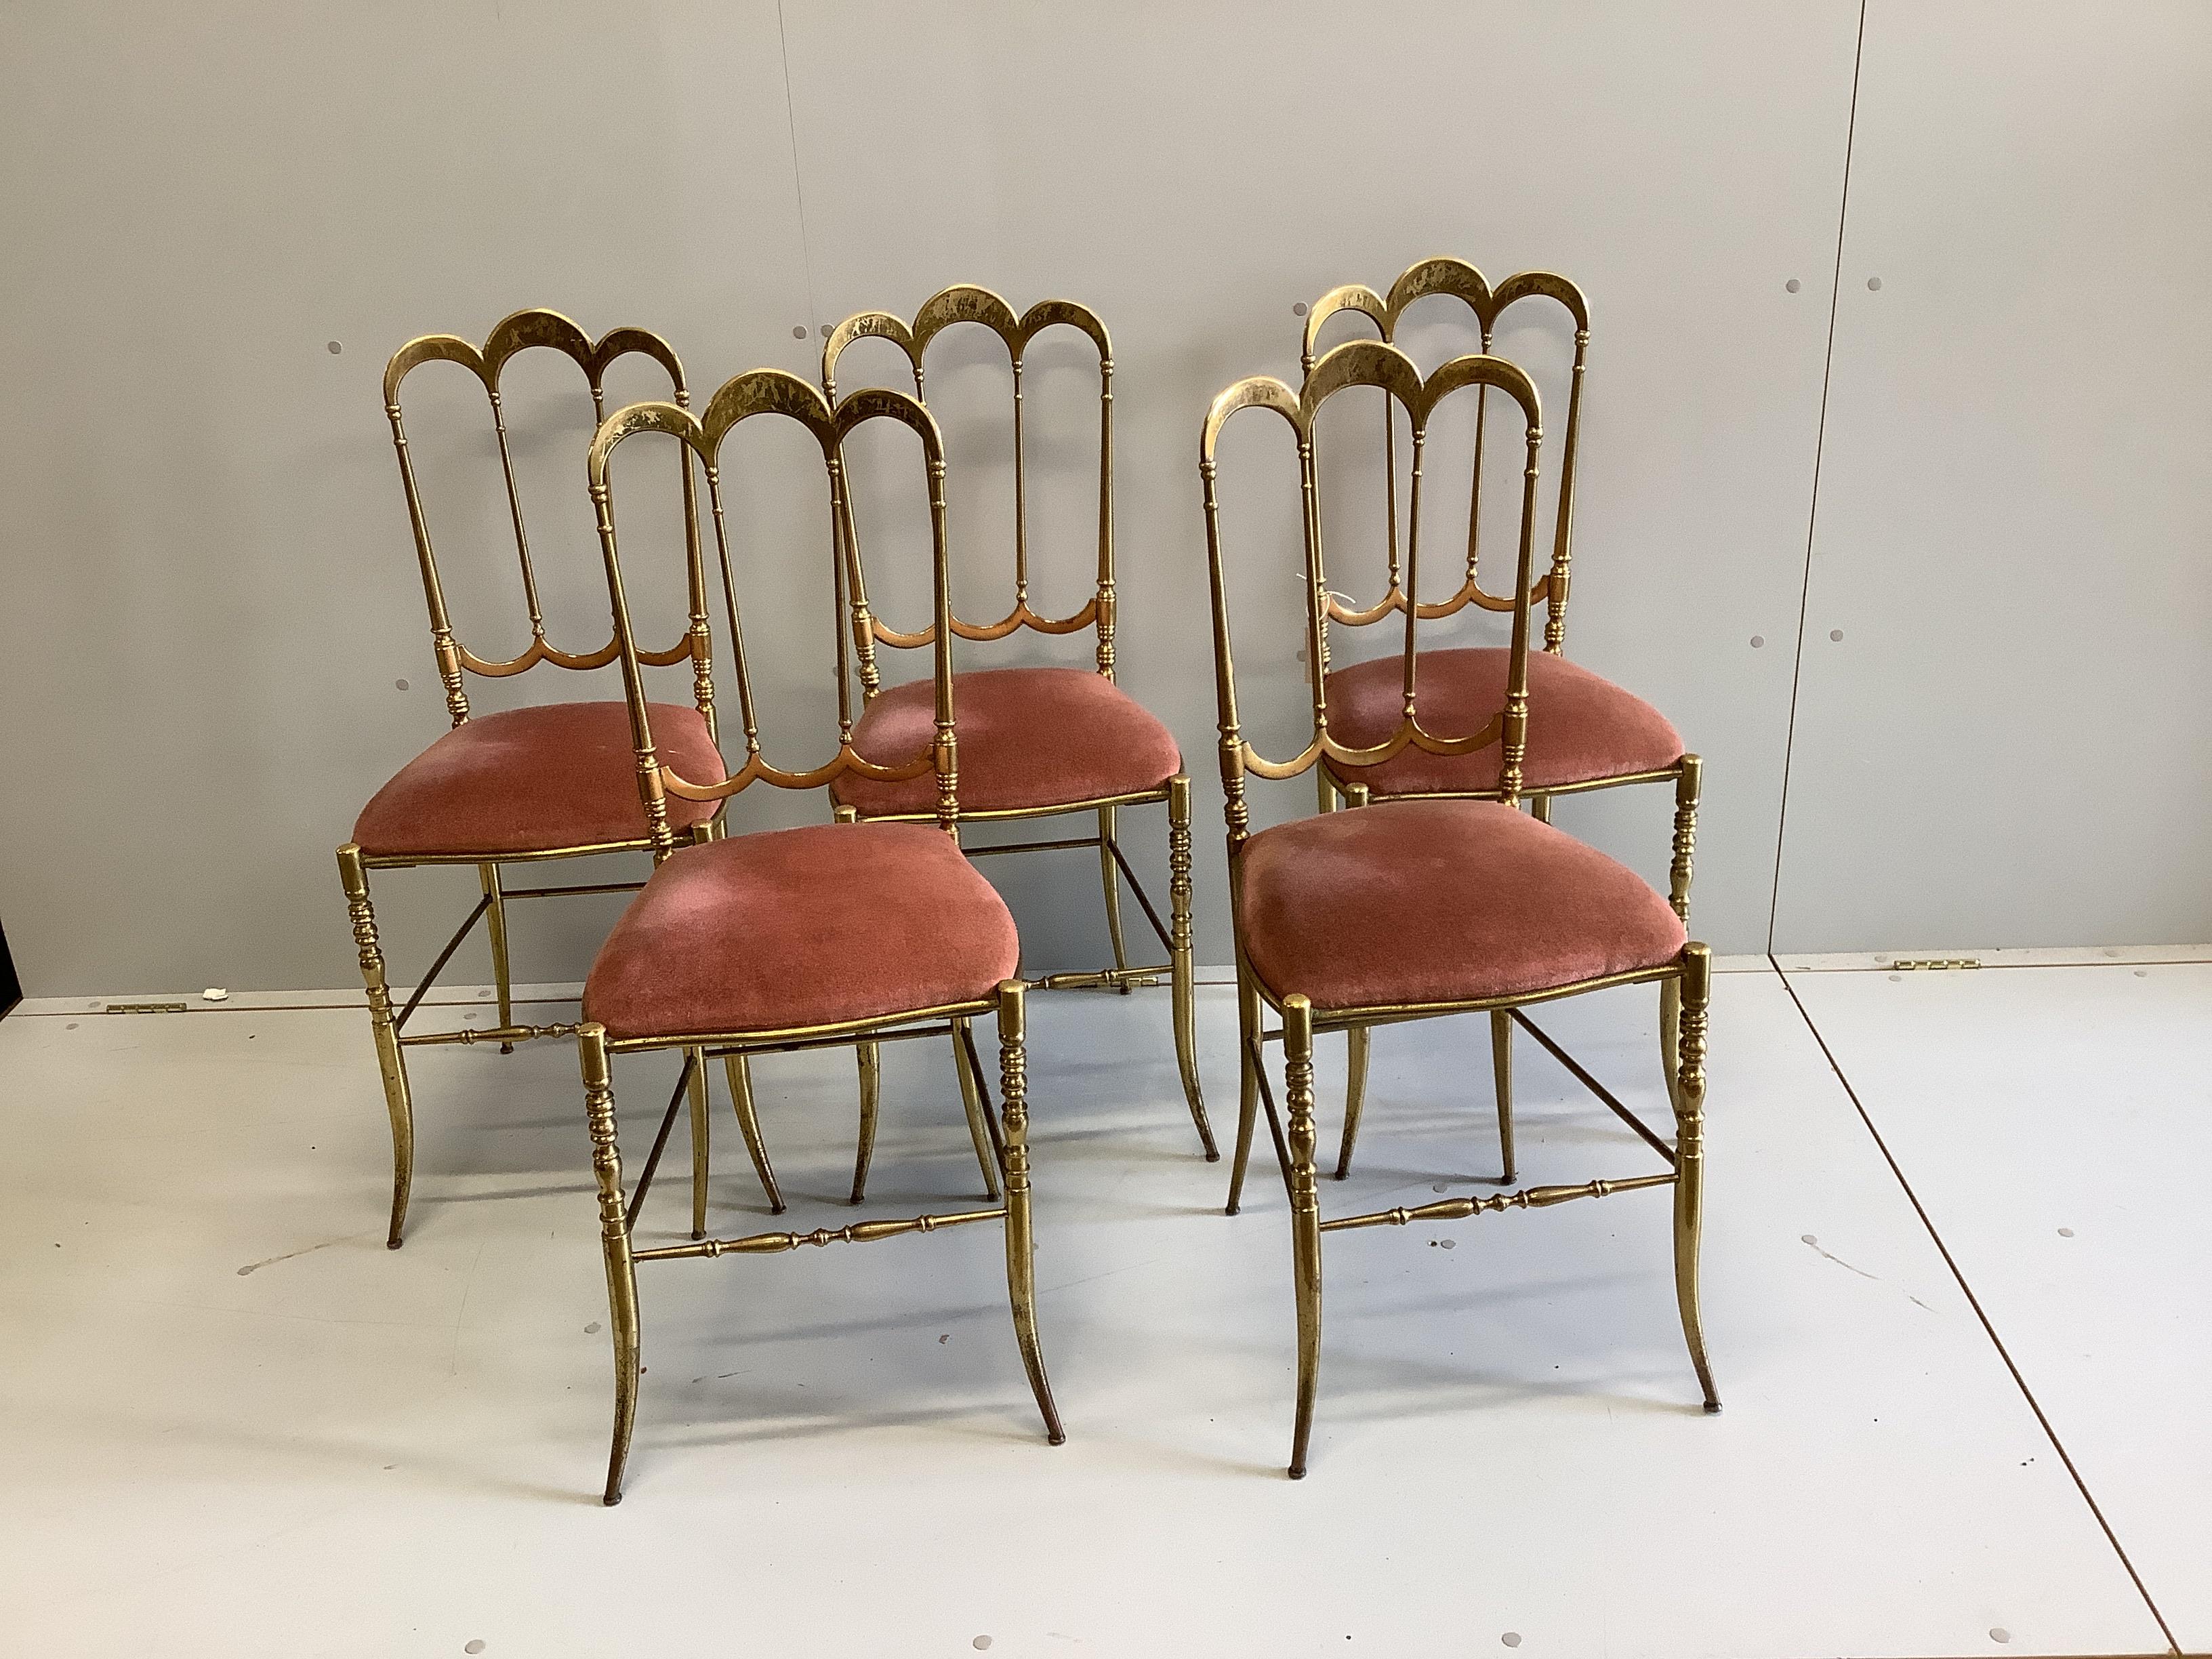 Five lacquered brass Shiavari style chairs, width 40cm, depth 39cm, height 95cm                                                                                                                                             